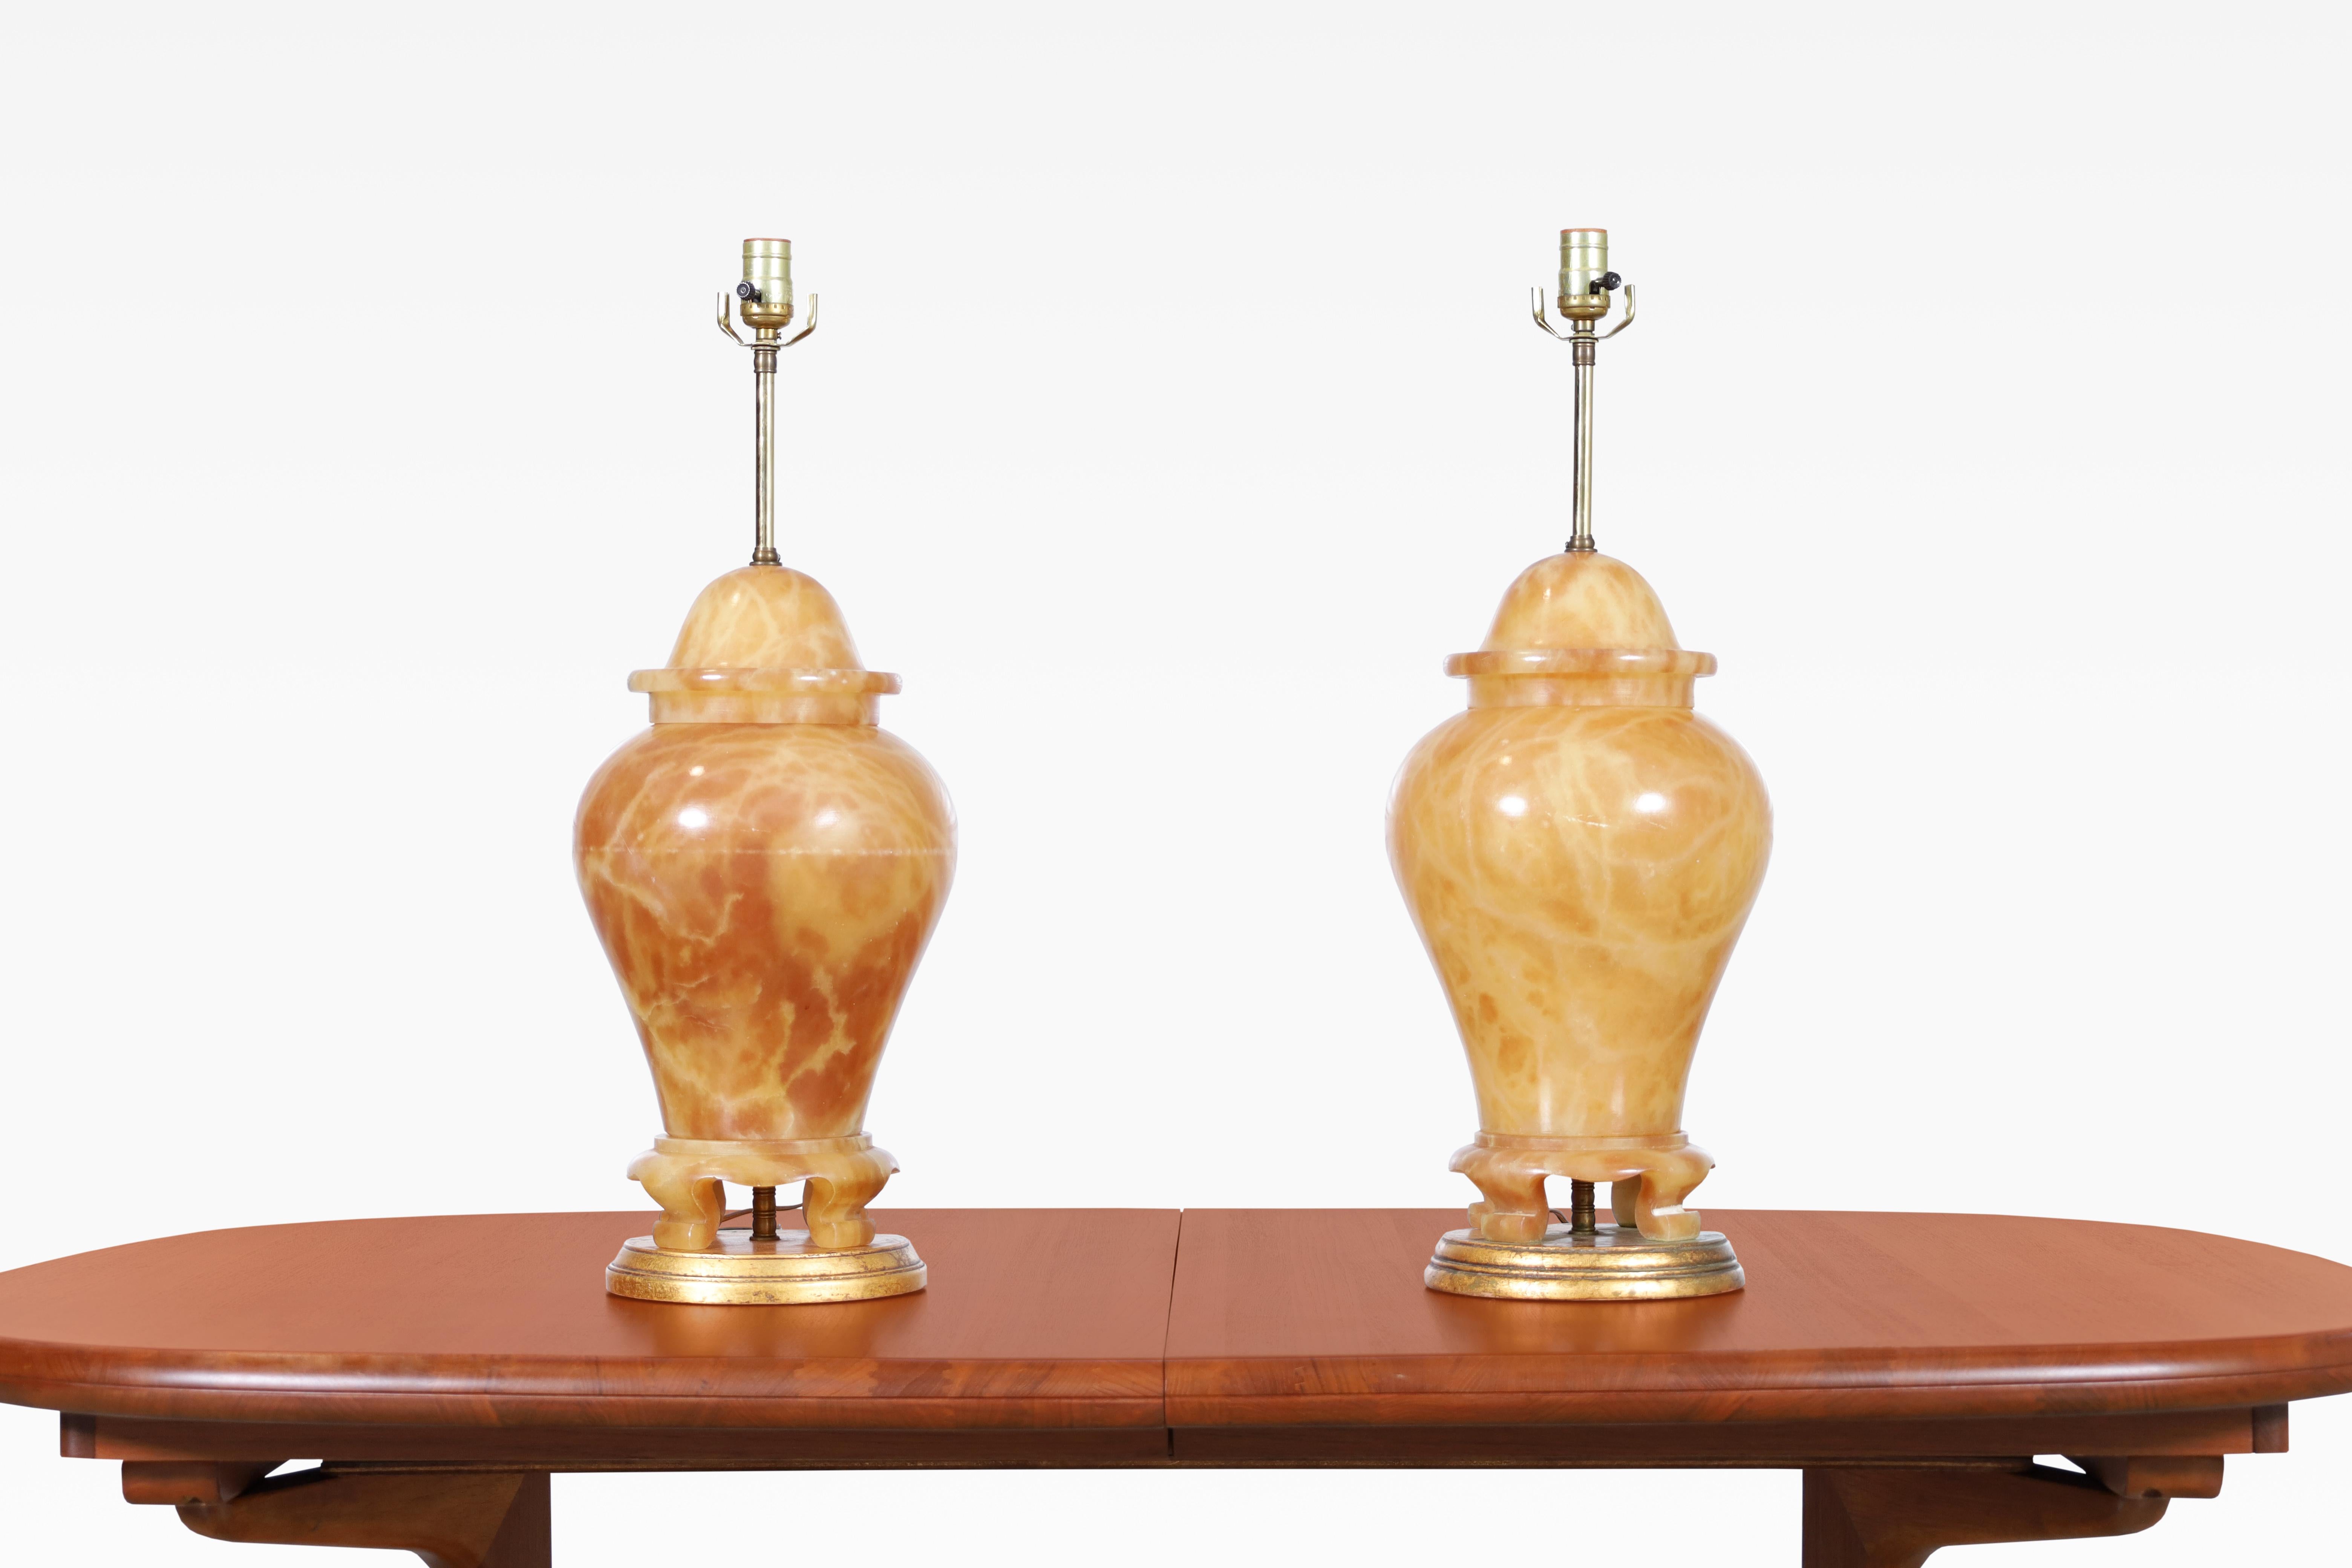 Beautiful Italian alabaster ginger jar table lamps, designed in Italy, circa 1960’s. These lamps are truly elegant, featuring a polished alabaster finish that's topped off with beautiful brass hardware. What sets them apart from other lamps is their